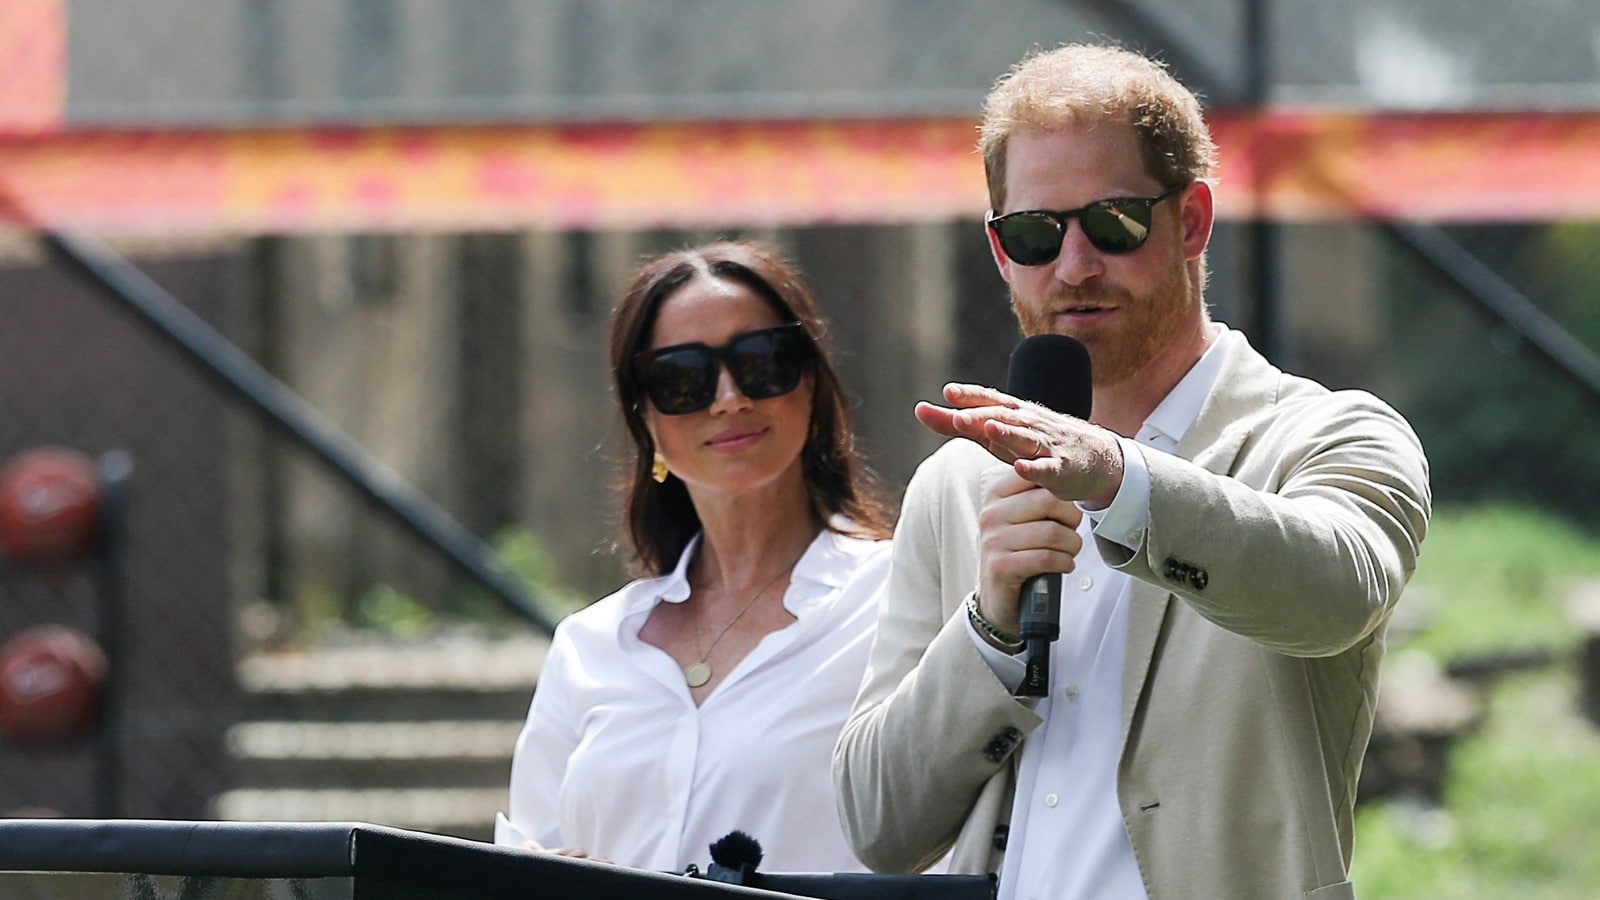 Prince Harry, Meghan Markle considering ‘plan B’ over fears of being thrown out of US if Trump wins